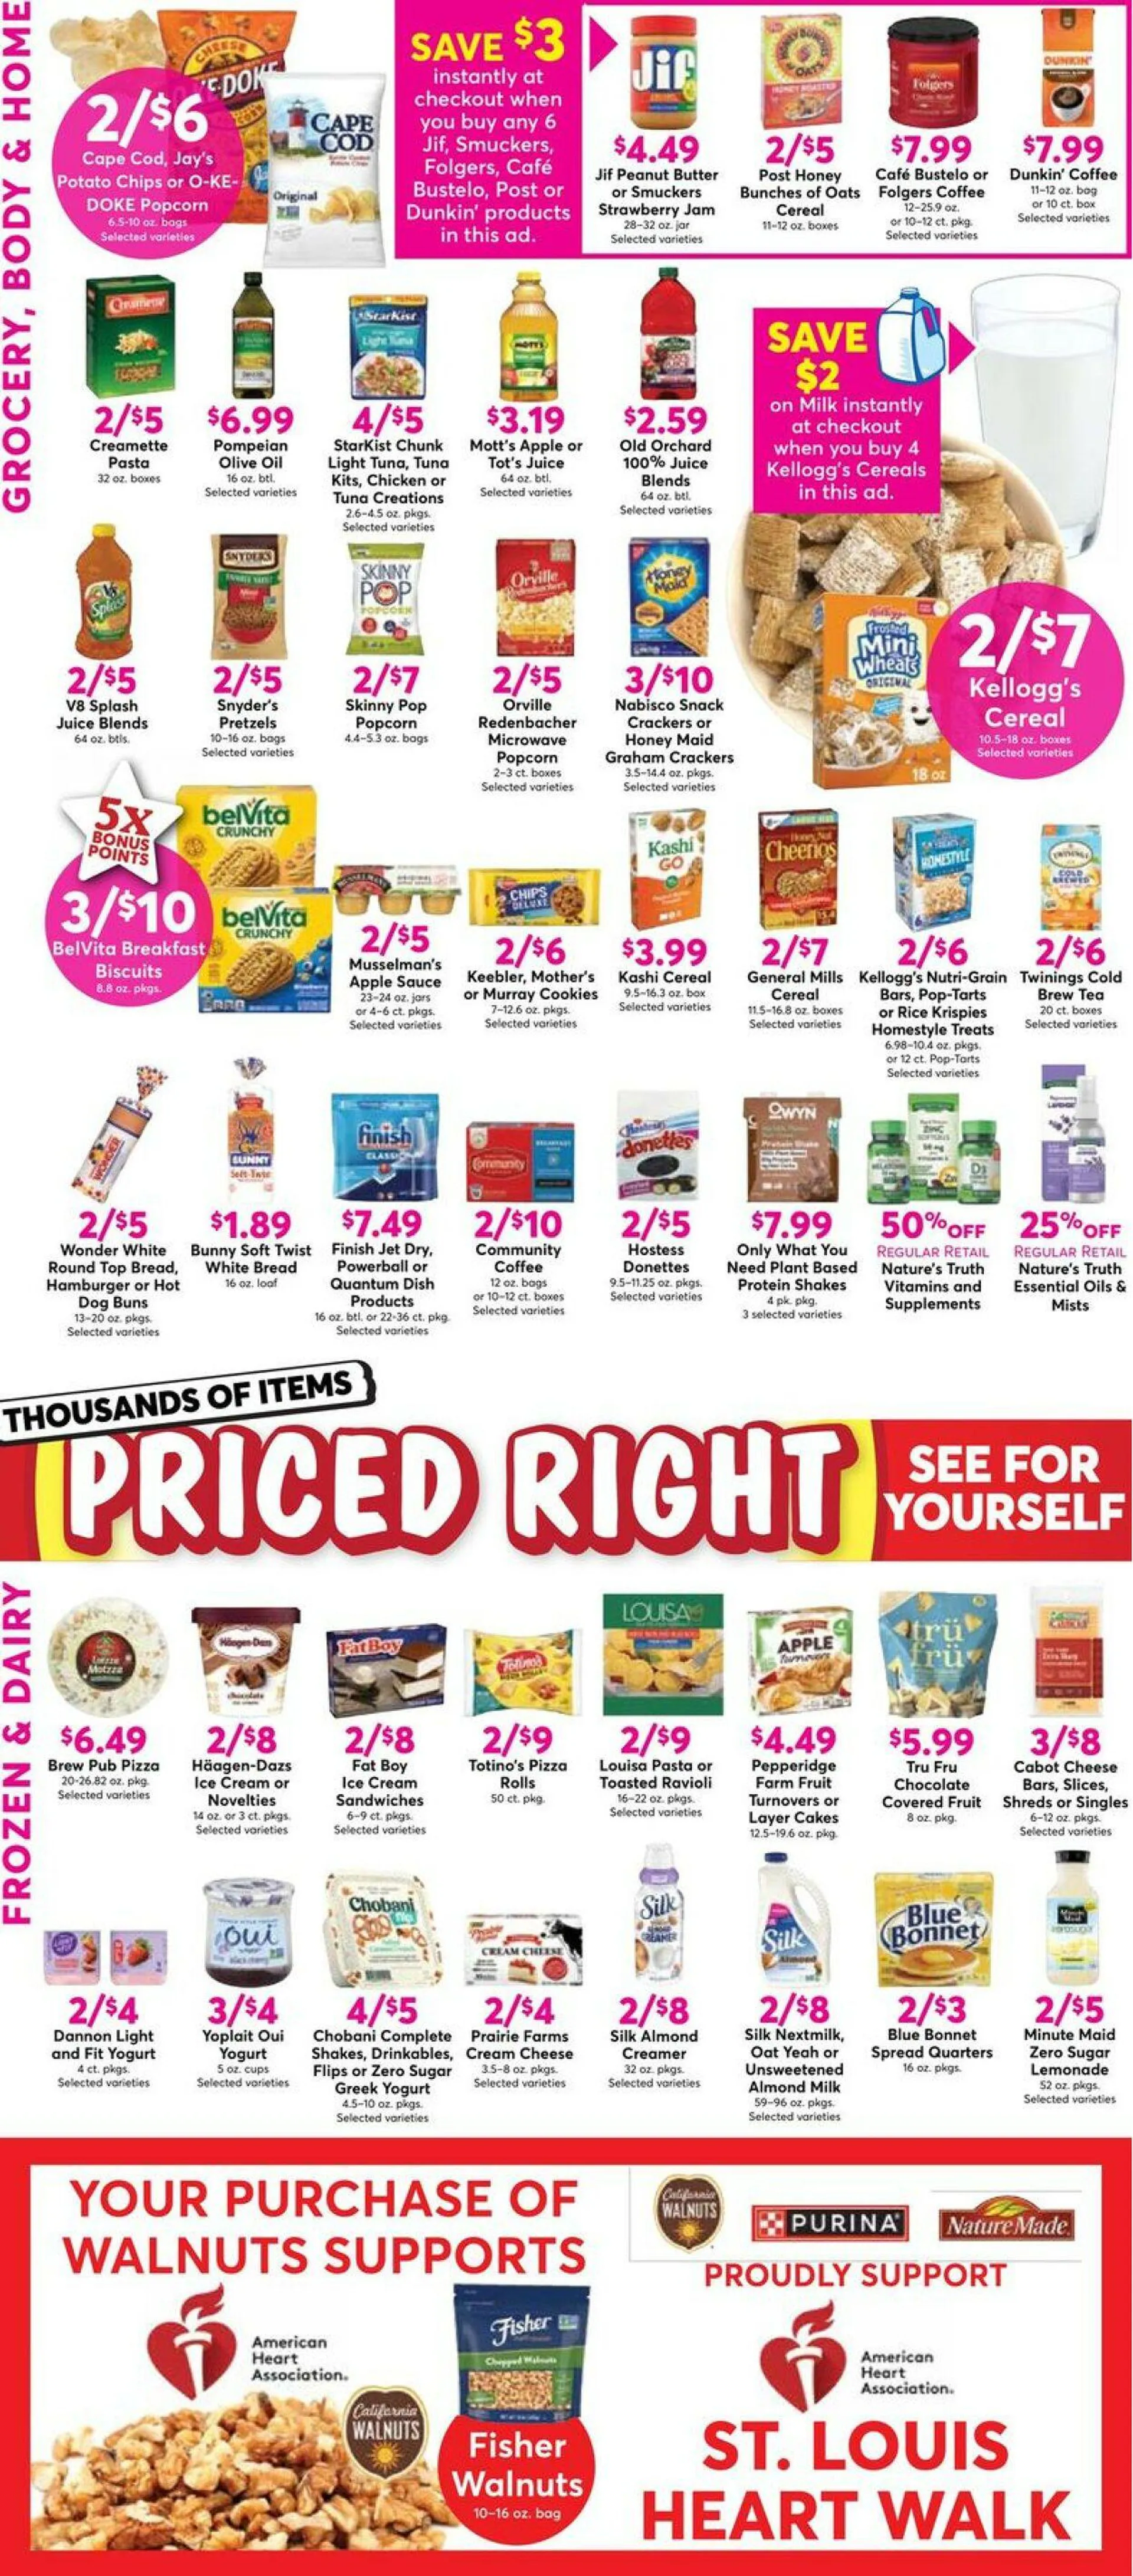 Dierbergs Current weekly ad - 2